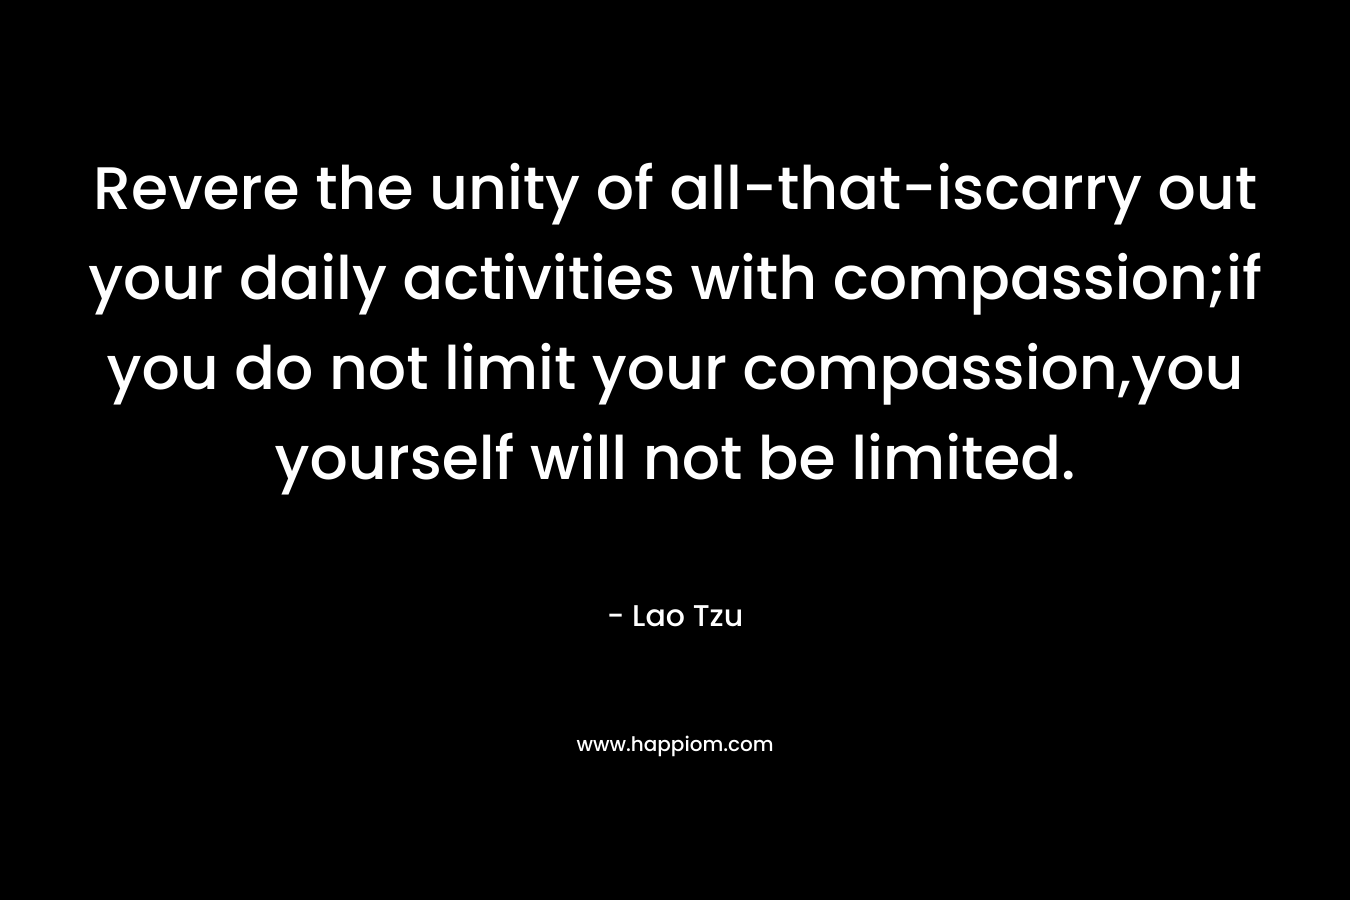 Revere the unity of all-that-iscarry out your daily activities with compassion;if you do not limit your compassion,you yourself will not be limited.